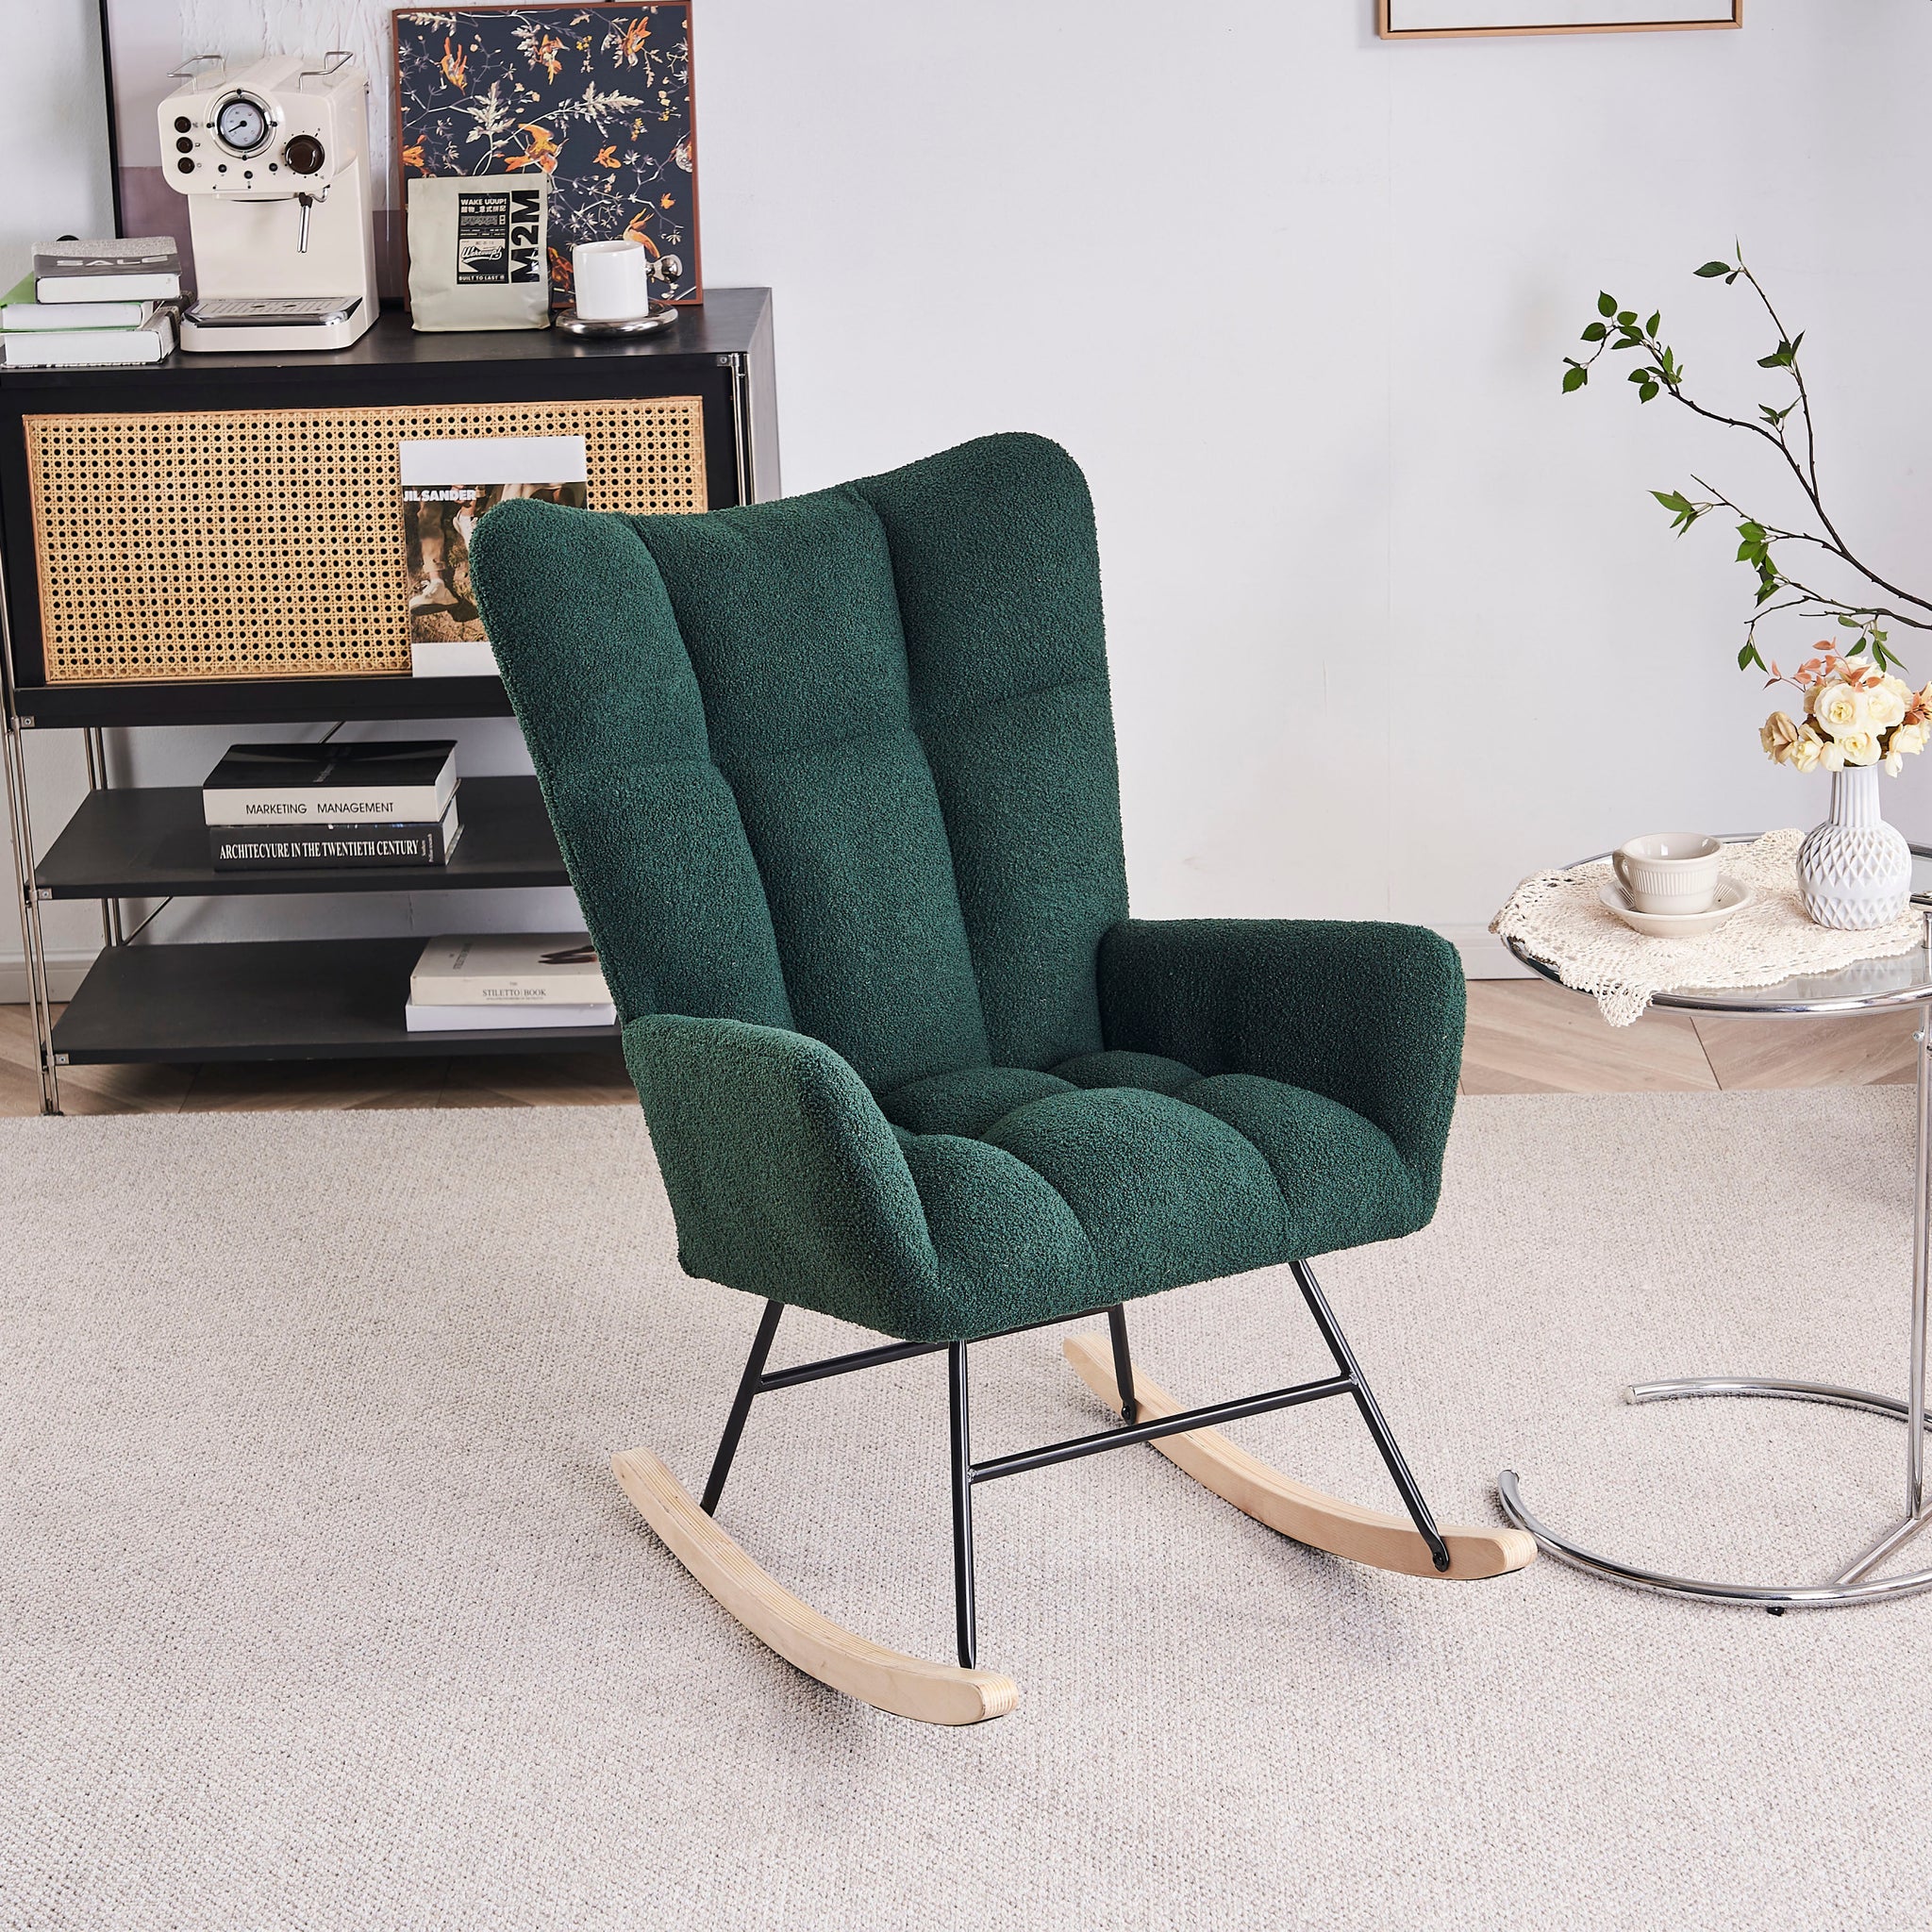 Rocking Chair Nursery, Solid Wood Legs Reading Chair emerald-primary living space-modern-rocking